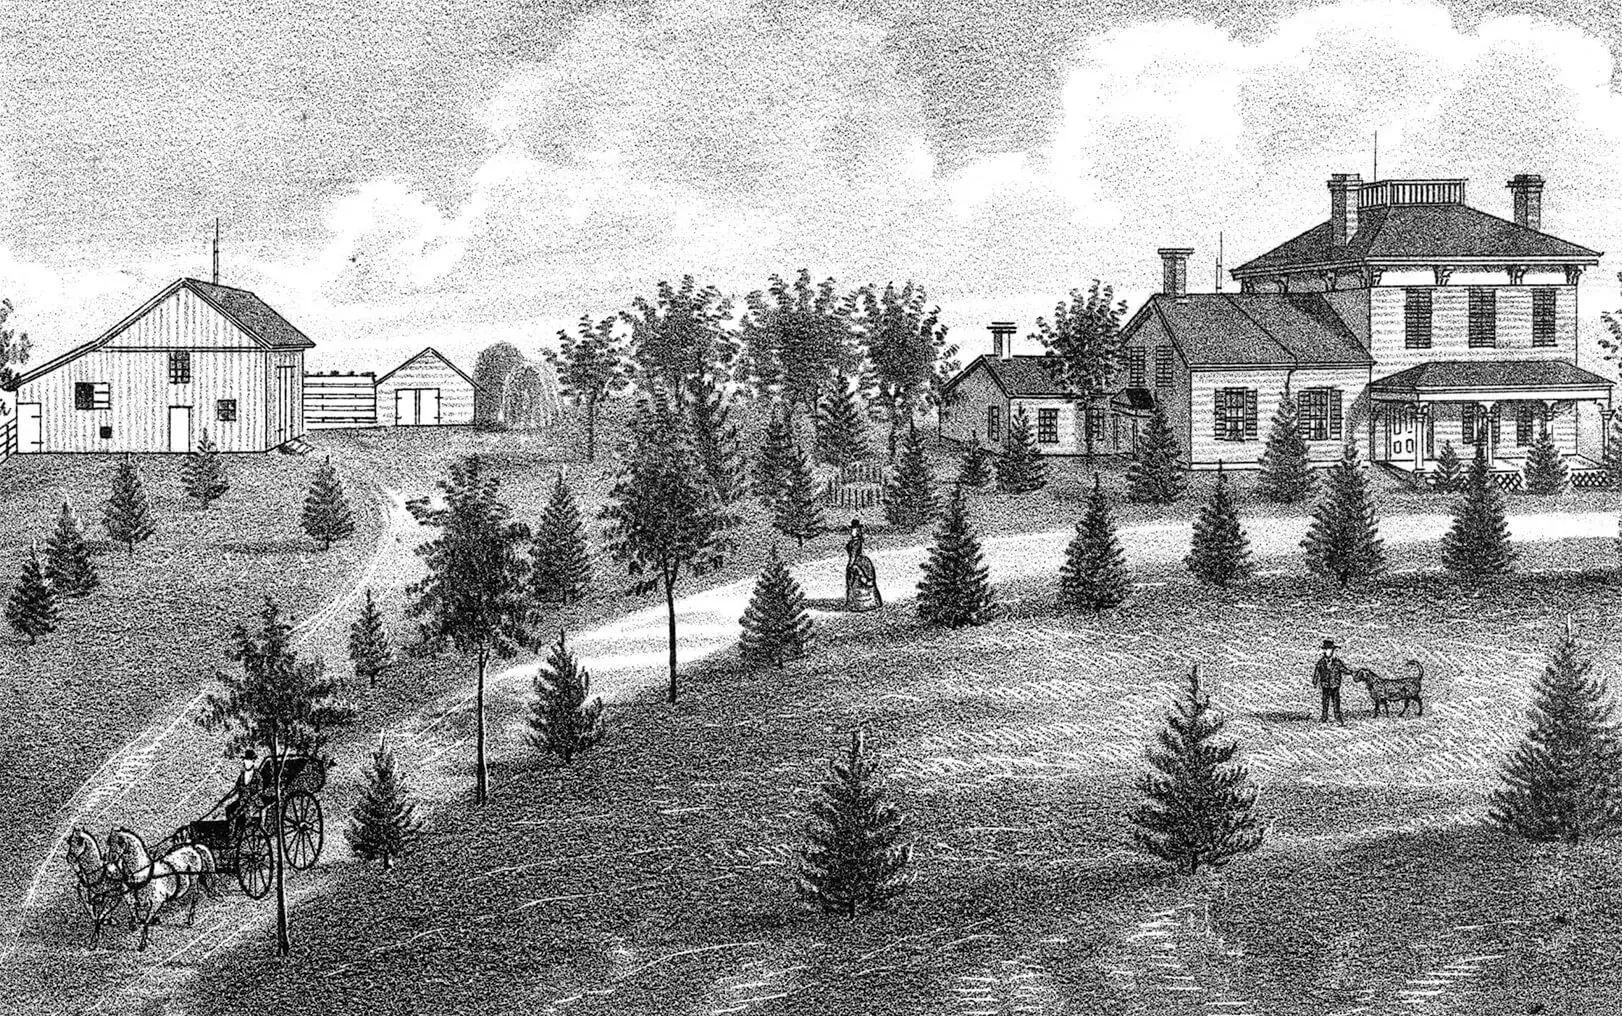 Black and white illustration of a four-square style house, with two additions to the left. There is a barn and shed to the far left of the image, many small trees, a man with a dog, and a horse-drawn carriage moving away from the house.